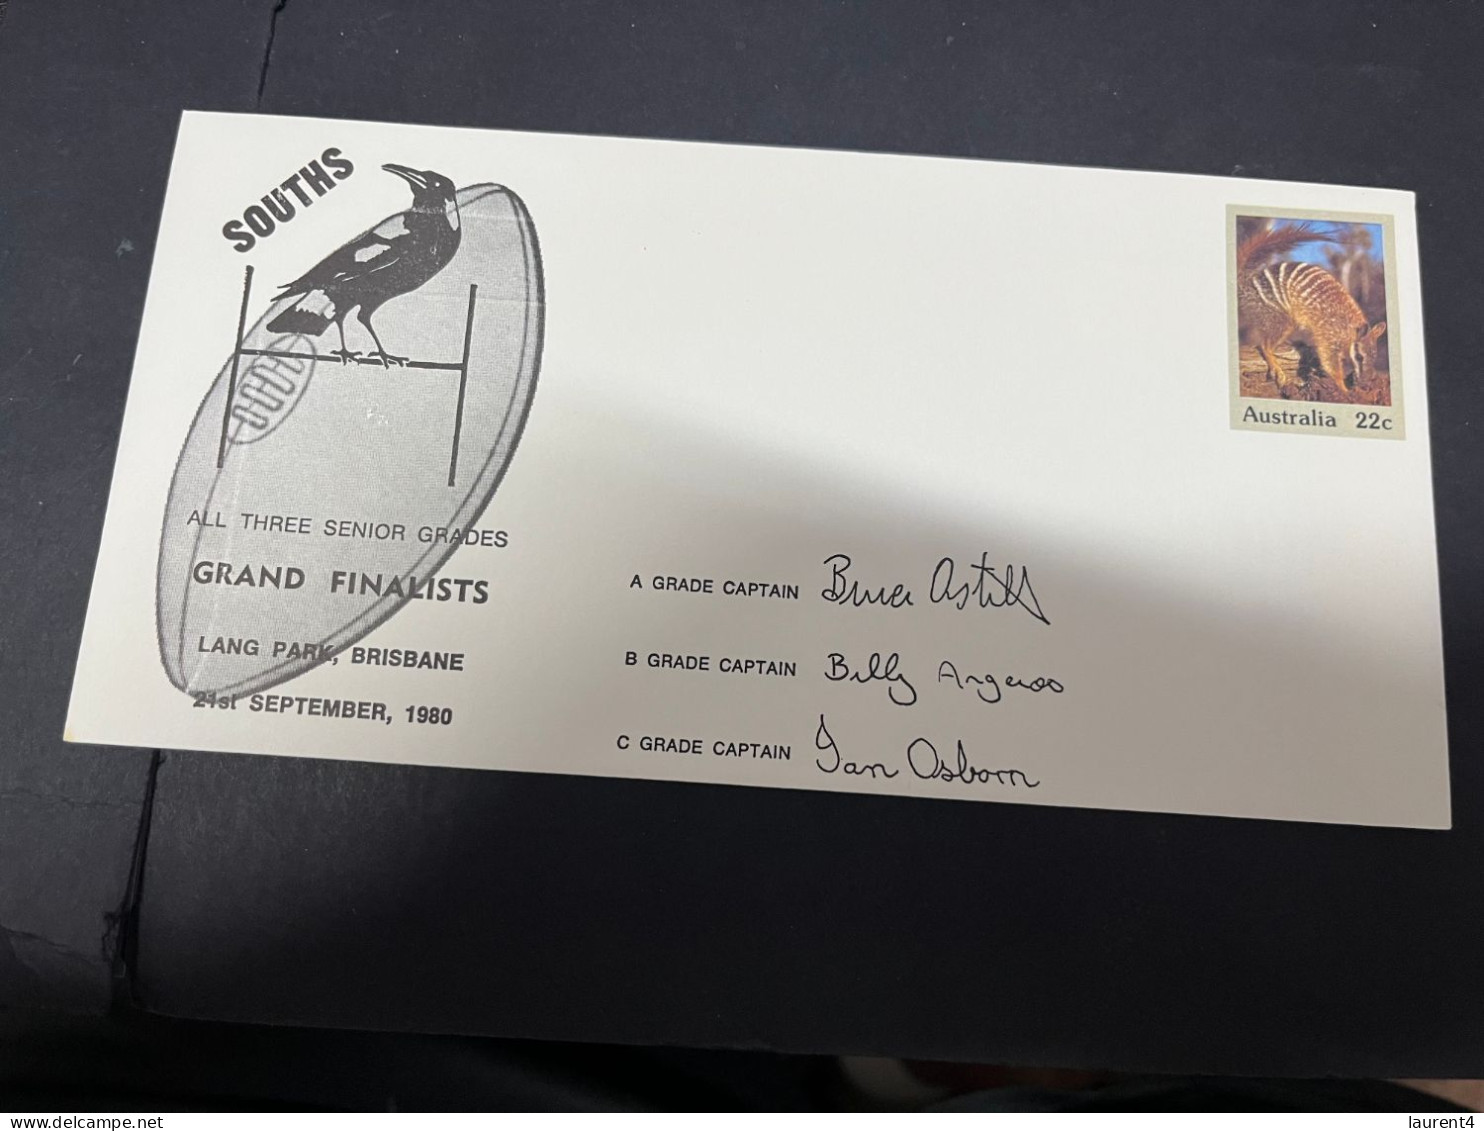 30-4-2023 (3 Z 29) Australia FDC (1 Covers) 1980 - OZ Football - South (magpies) Grand Finalists (signed - Numbat) - Primo Giorno D'emissione (FDC)